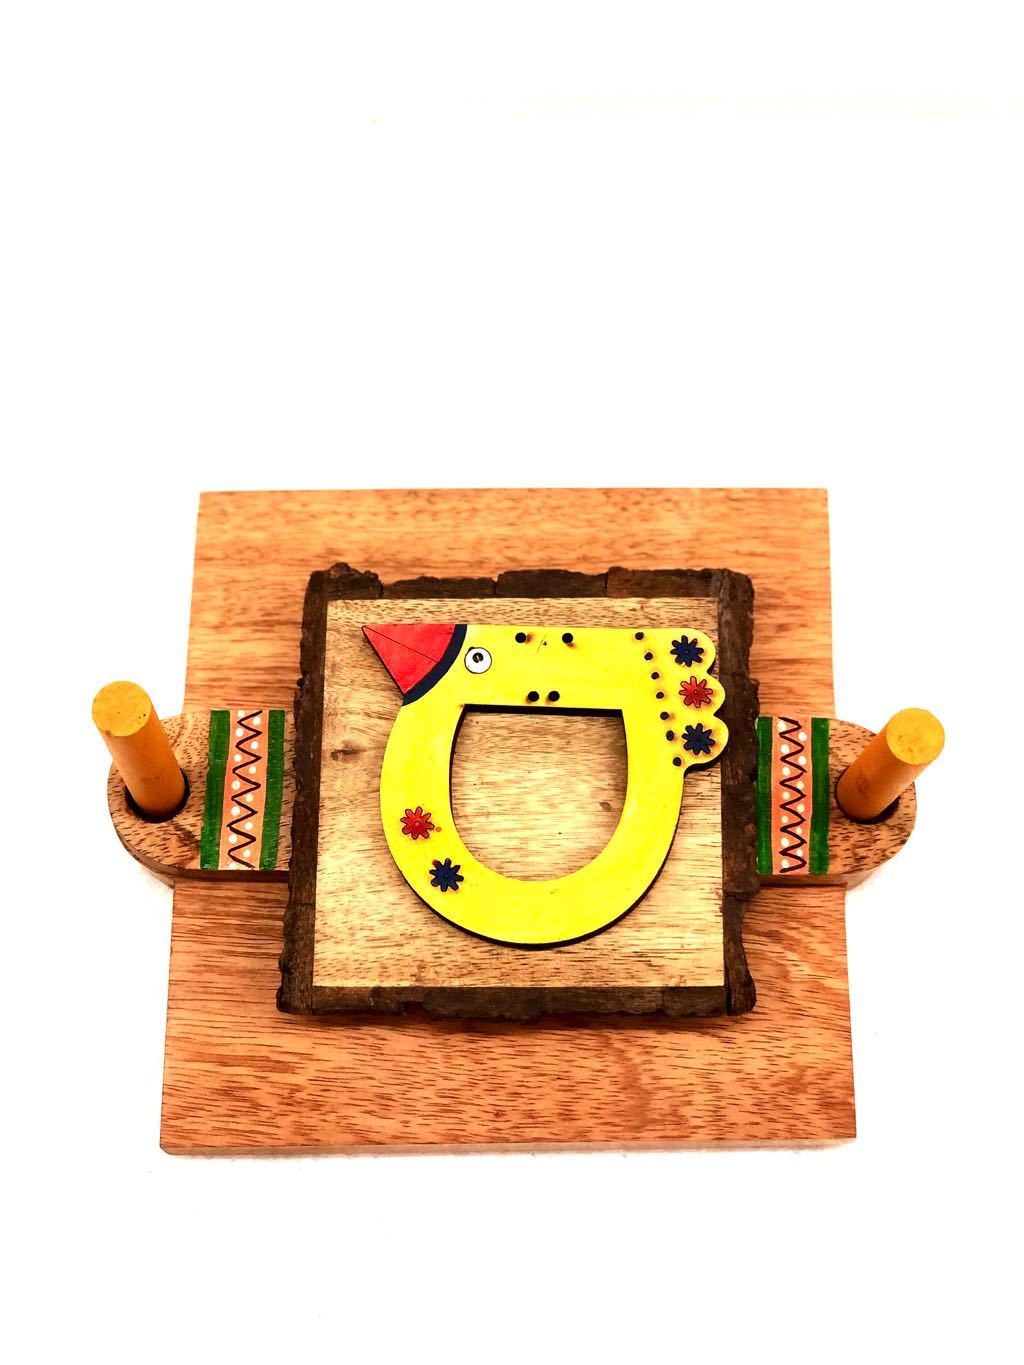 Sparrow Designed Remarkable HandPainted Napkin Holder By Tamrapatra